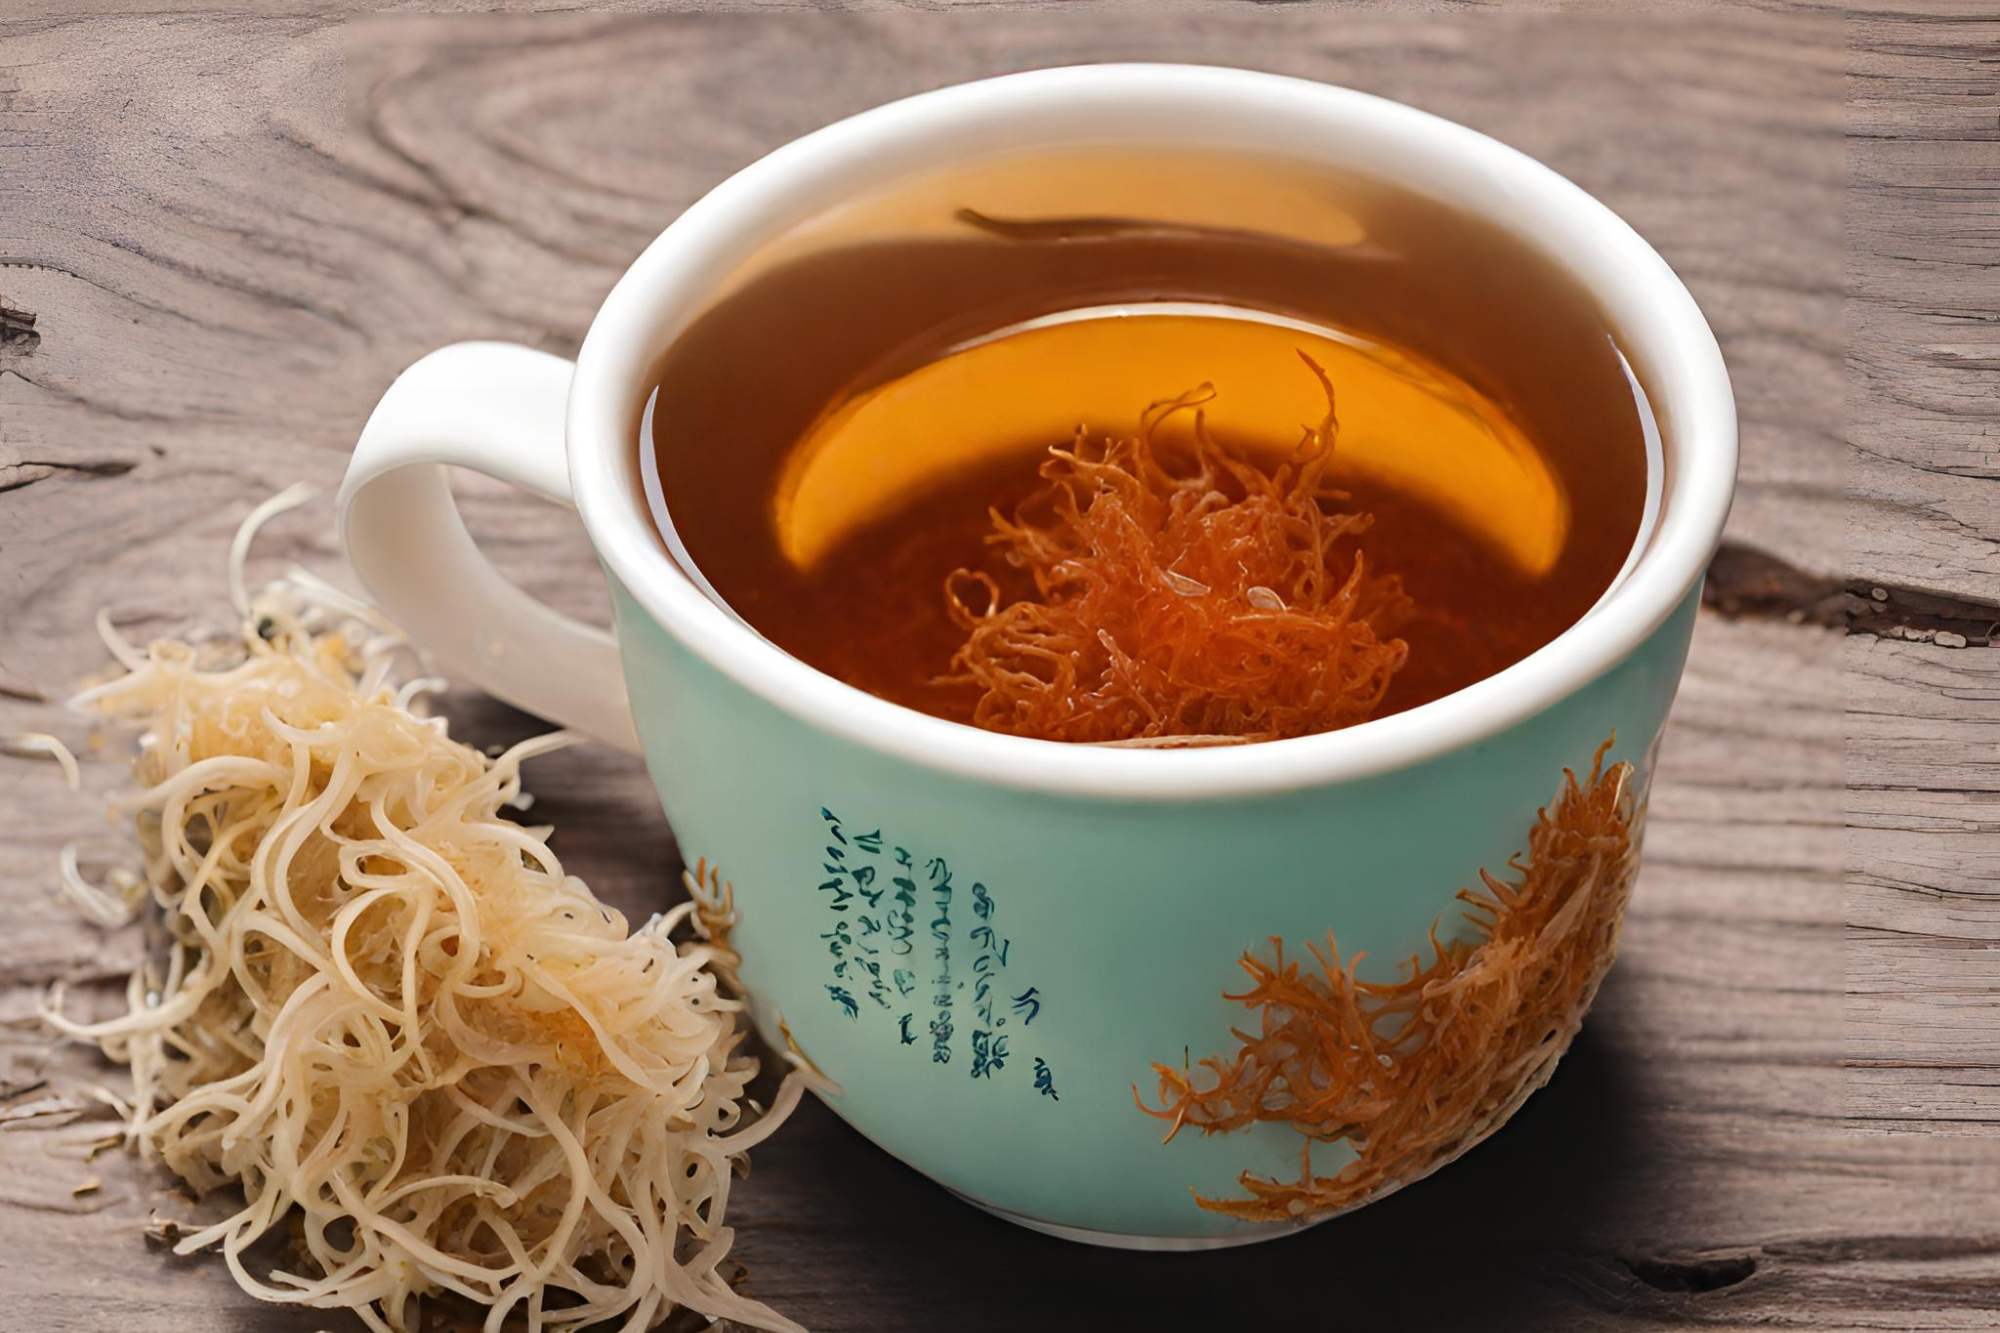 A cup of tea with sea moss gel added to it